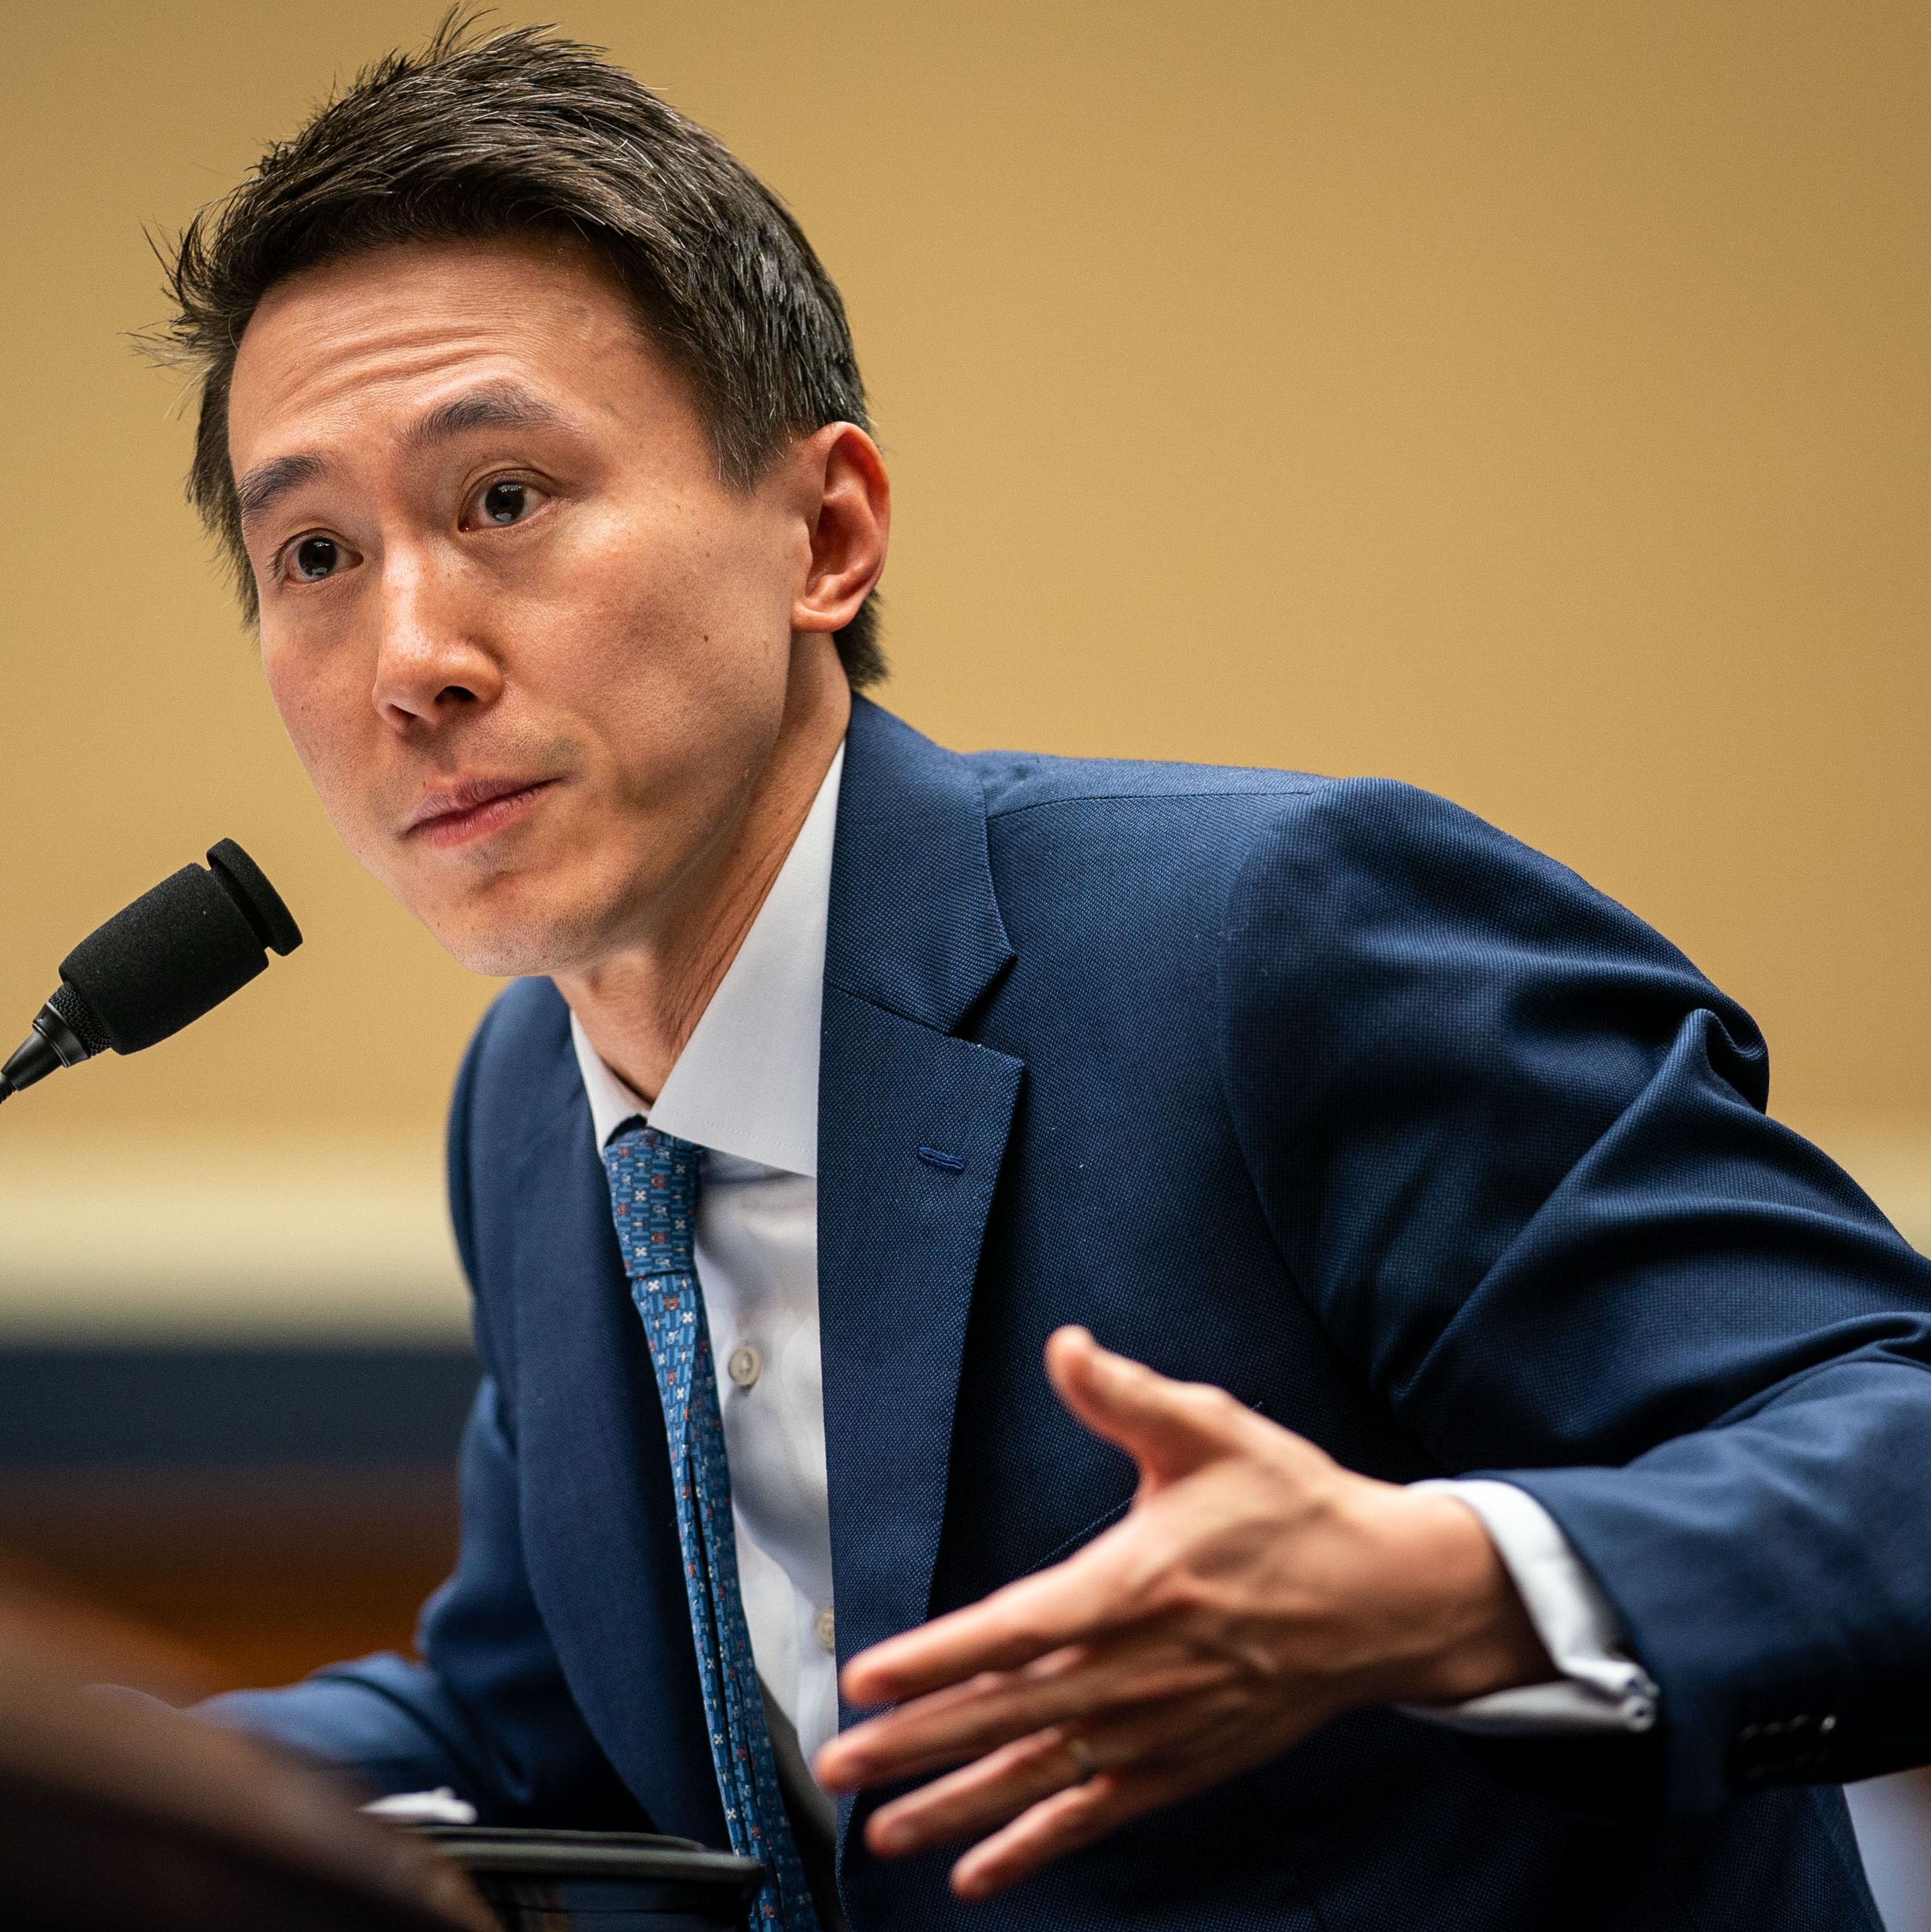 Who Is TikTok CEO Shou Zi Chew, And Why Did He Testify Before Congress?